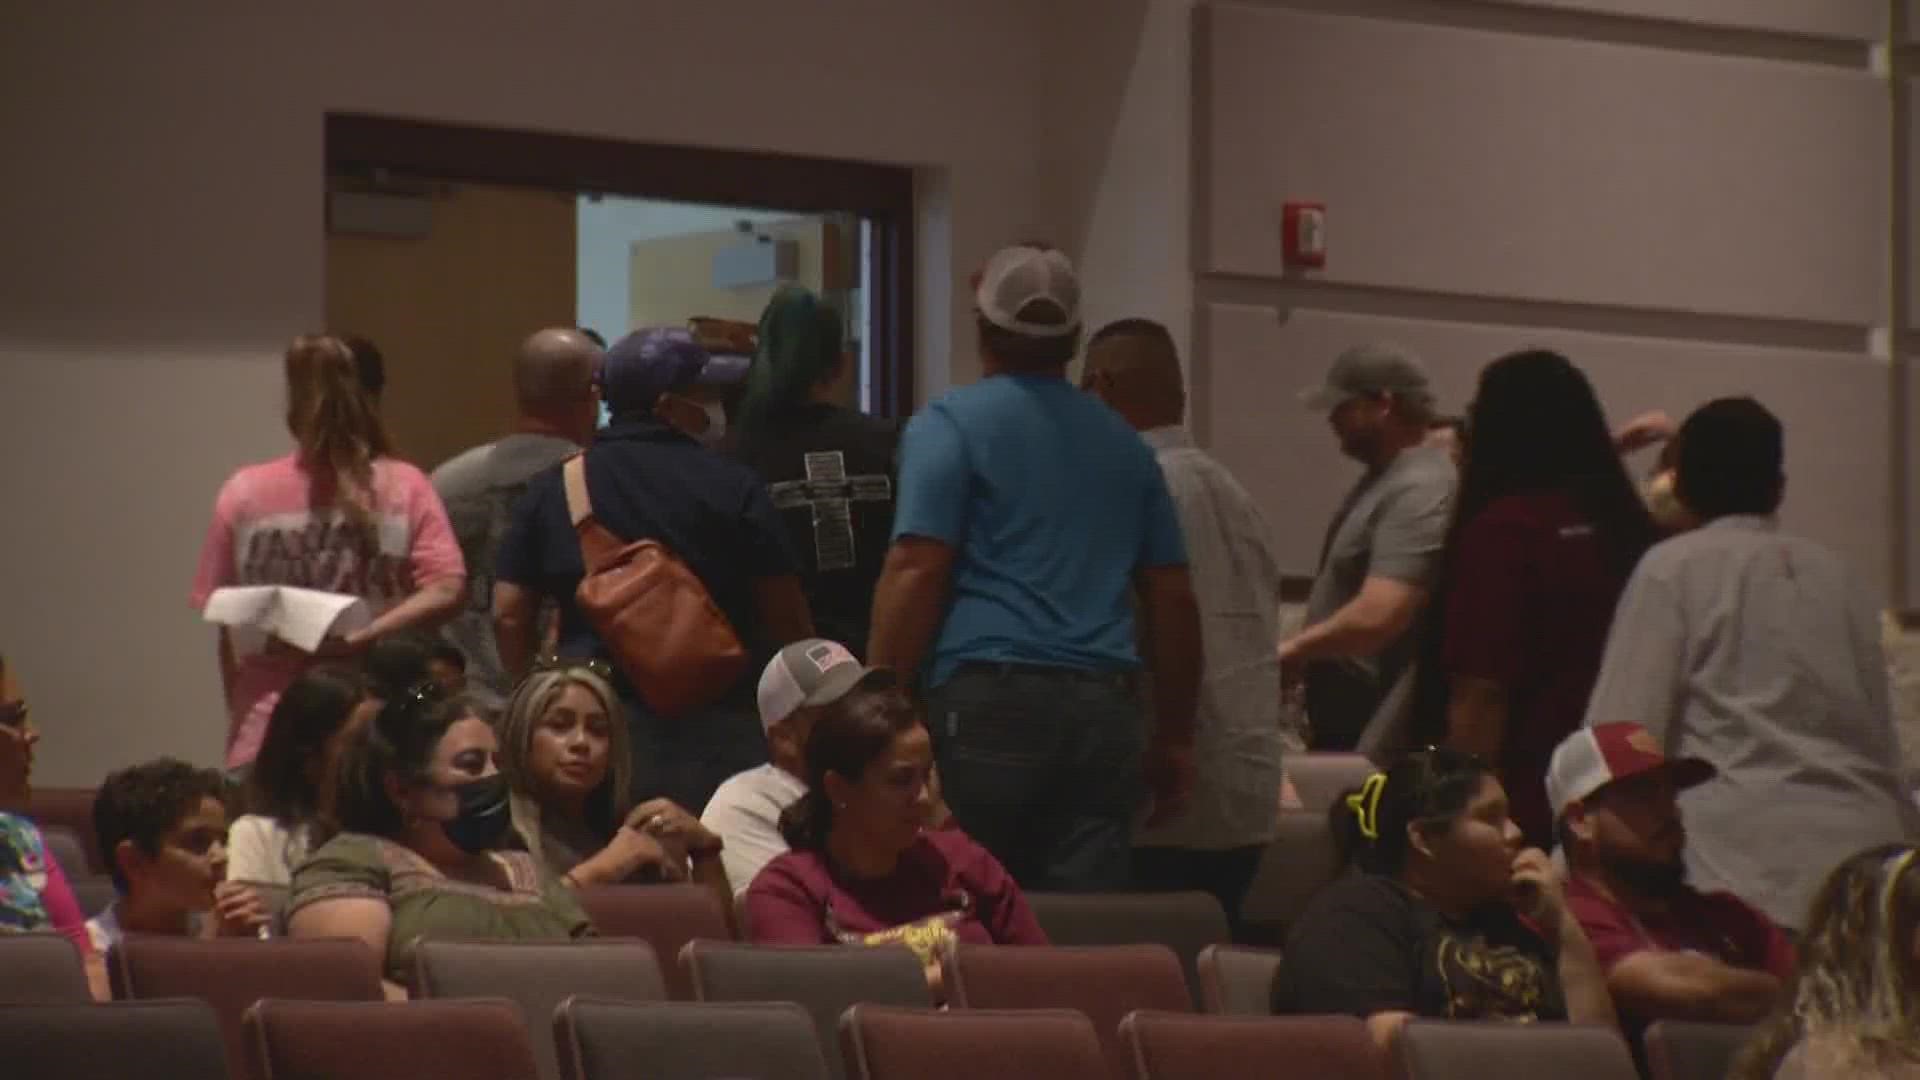 The dramatic moment came early in the meeting, and resulted in over a dozen attendees standing up and leaving the auditorium.